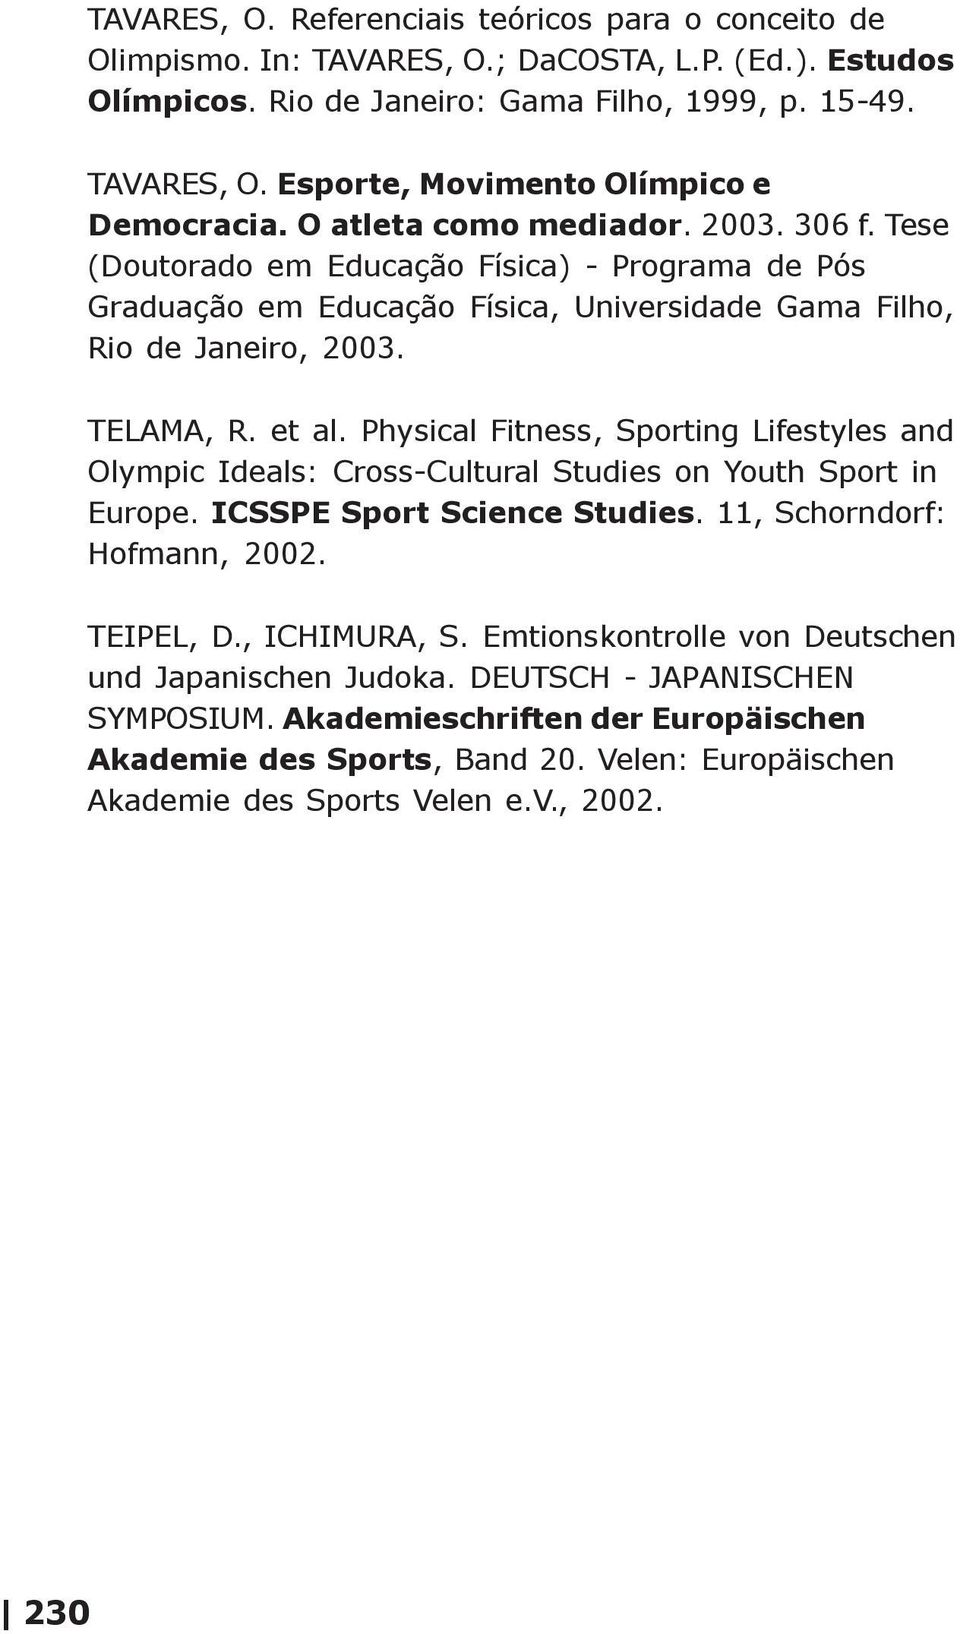 Physical Fitness, Sporting Lifestyles and Olympic Ideals: Cross-Cultural Studies on Youth Sport in Europe. ICSSPE Sport Science Studies. 11, Schorndorf: Hofmann, 2002. TEIPEL, D., ICHIMURA, S.